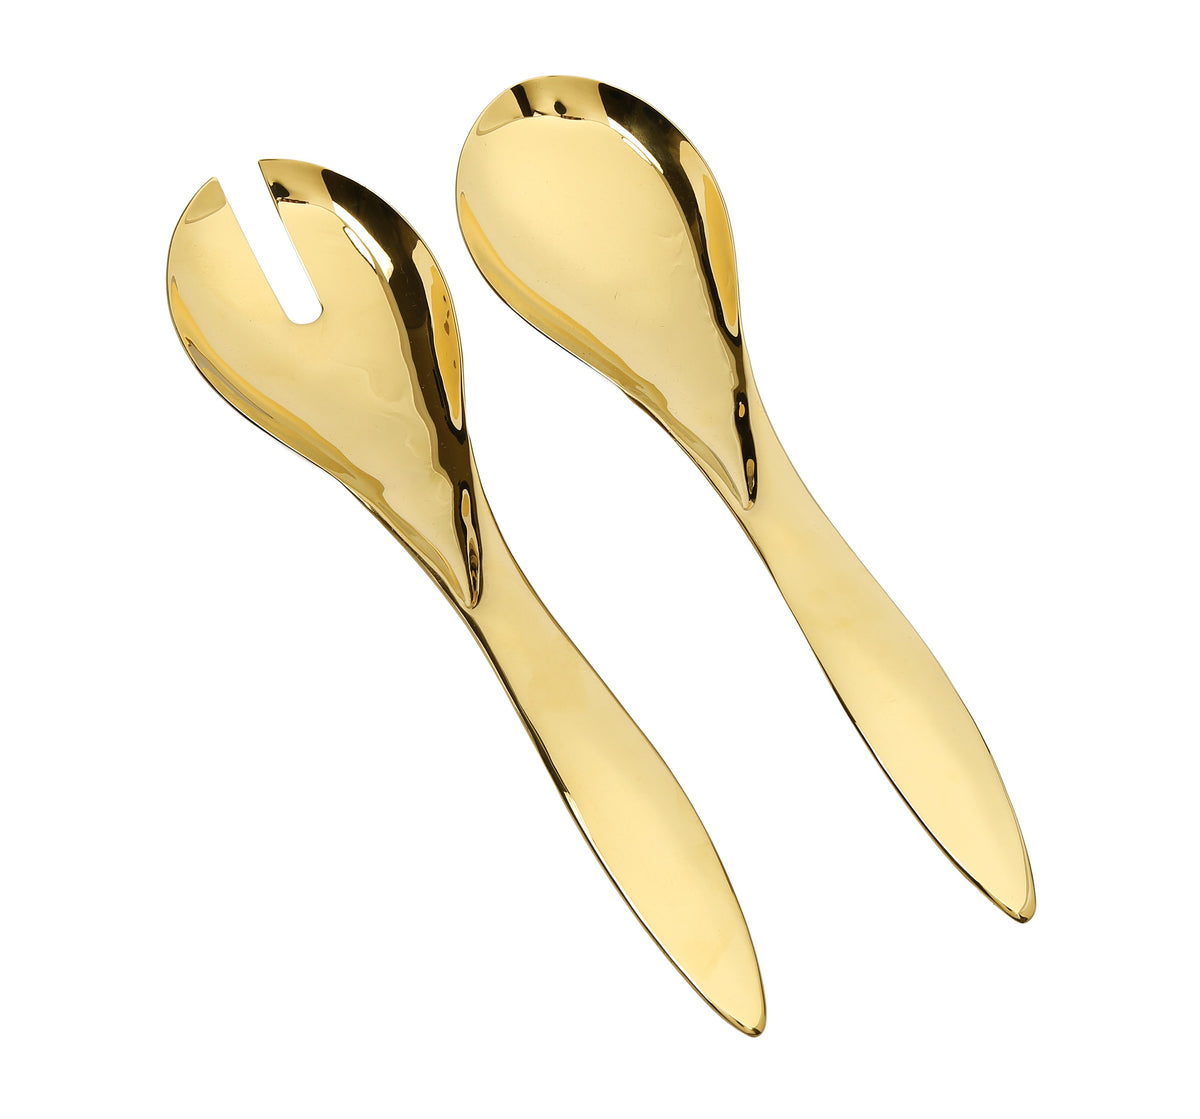 Classic Touch Set of 2 Shiny Gold Salad Servers